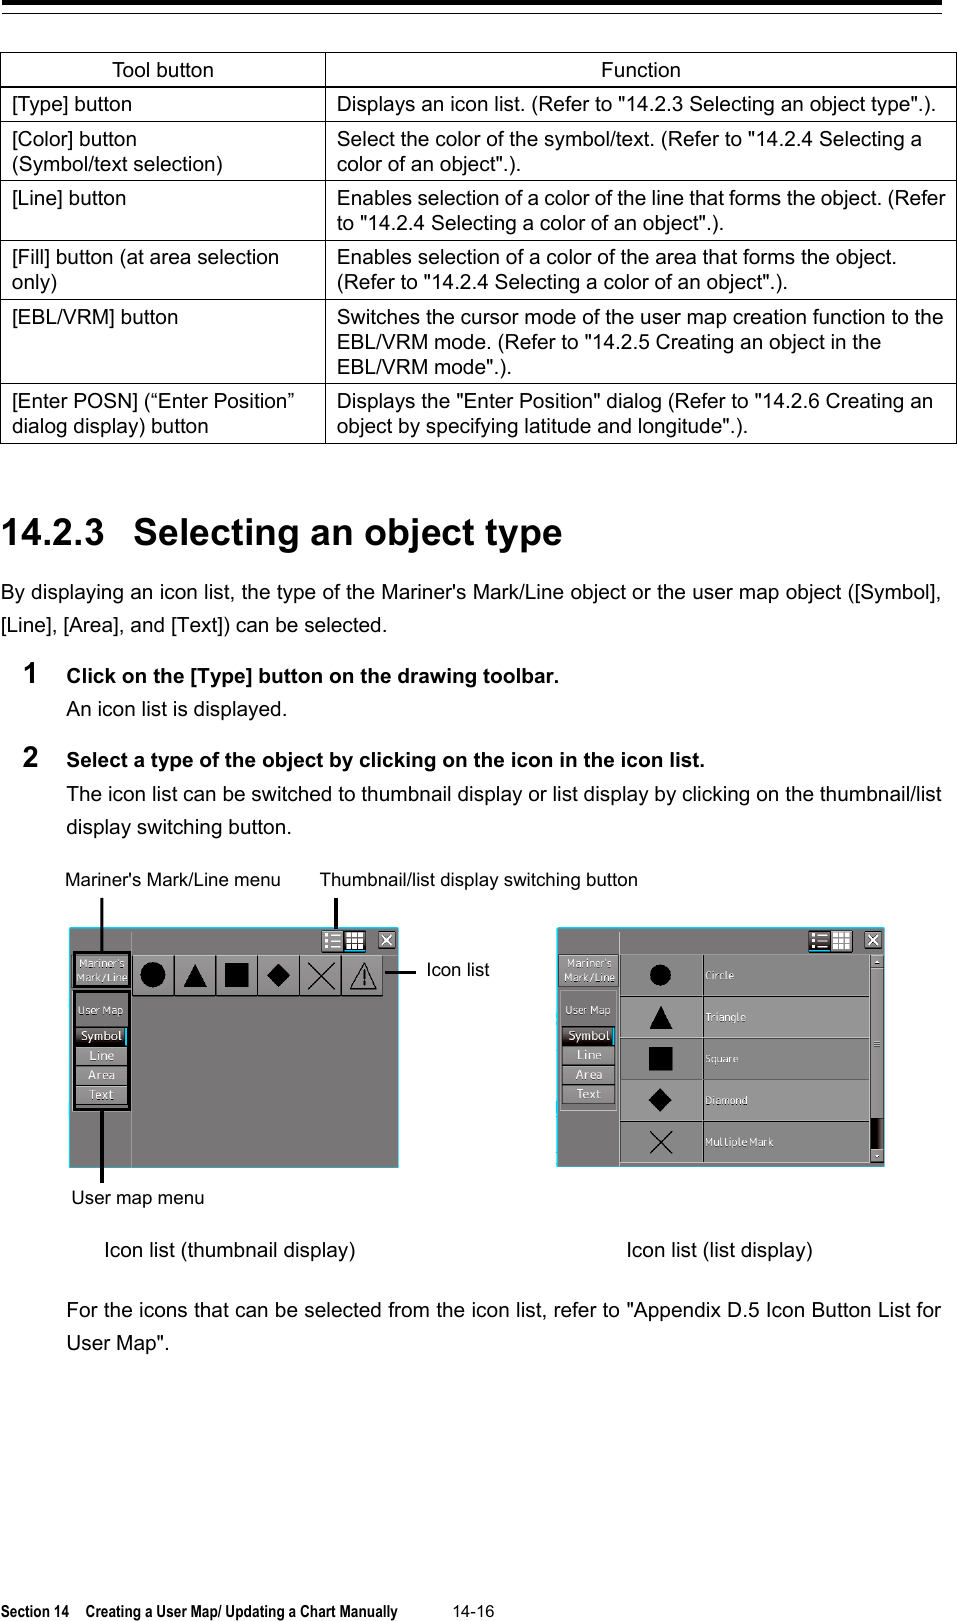  Section 14  Creating a User Map/ Updating a Chart Manually 14-16  Tool button Function [Type] button    Displays an icon list. (Refer to &quot;14.2.3 Selecting an object type&quot;.). [Color] button (Symbol/text selection) Select the color of the symbol/text. (Refer to &quot;14.2.4 Selecting a color of an object&quot;.). [Line] button Enables selection of a color of the line that forms the object. (Refer to &quot;14.2.4 Selecting a color of an object&quot;.). [Fill] button (at area selection only) Enables selection of a color of the area that forms the object. (Refer to &quot;14.2.4 Selecting a color of an object&quot;.). [EBL/VRM] button    Switches the cursor mode of the user map creation function to the EBL/VRM mode. (Refer to &quot;14.2.5 Creating an object in the EBL/VRM mode&quot;.). [Enter POSN] (“Enter Position” dialog display) button Displays the &quot;Enter Position&quot; dialog (Refer to &quot;14.2.6 Creating an object by specifying latitude and longitude&quot;.).   14.2.3 Selecting an object type By displaying an icon list, the type of the Mariner&apos;s Mark/Line object or the user map object ([Symbol], [Line], [Area], and [Text]) can be selected. 1  Click on the [Type] button on the drawing toolbar. An icon list is displayed. 2  Select a type of the object by clicking on the icon in the icon list. The icon list can be switched to thumbnail display or list display by clicking on the thumbnail/list display switching button.  For the icons that can be selected from the icon list, refer to &quot;Appendix D.5 Icon Button List for User Map&quot;.  Icon list Thumbnail/list display switching button Mariner&apos;s Mark/Line menu User map menu Icon list (thumbnail display) Icon list (list display) 